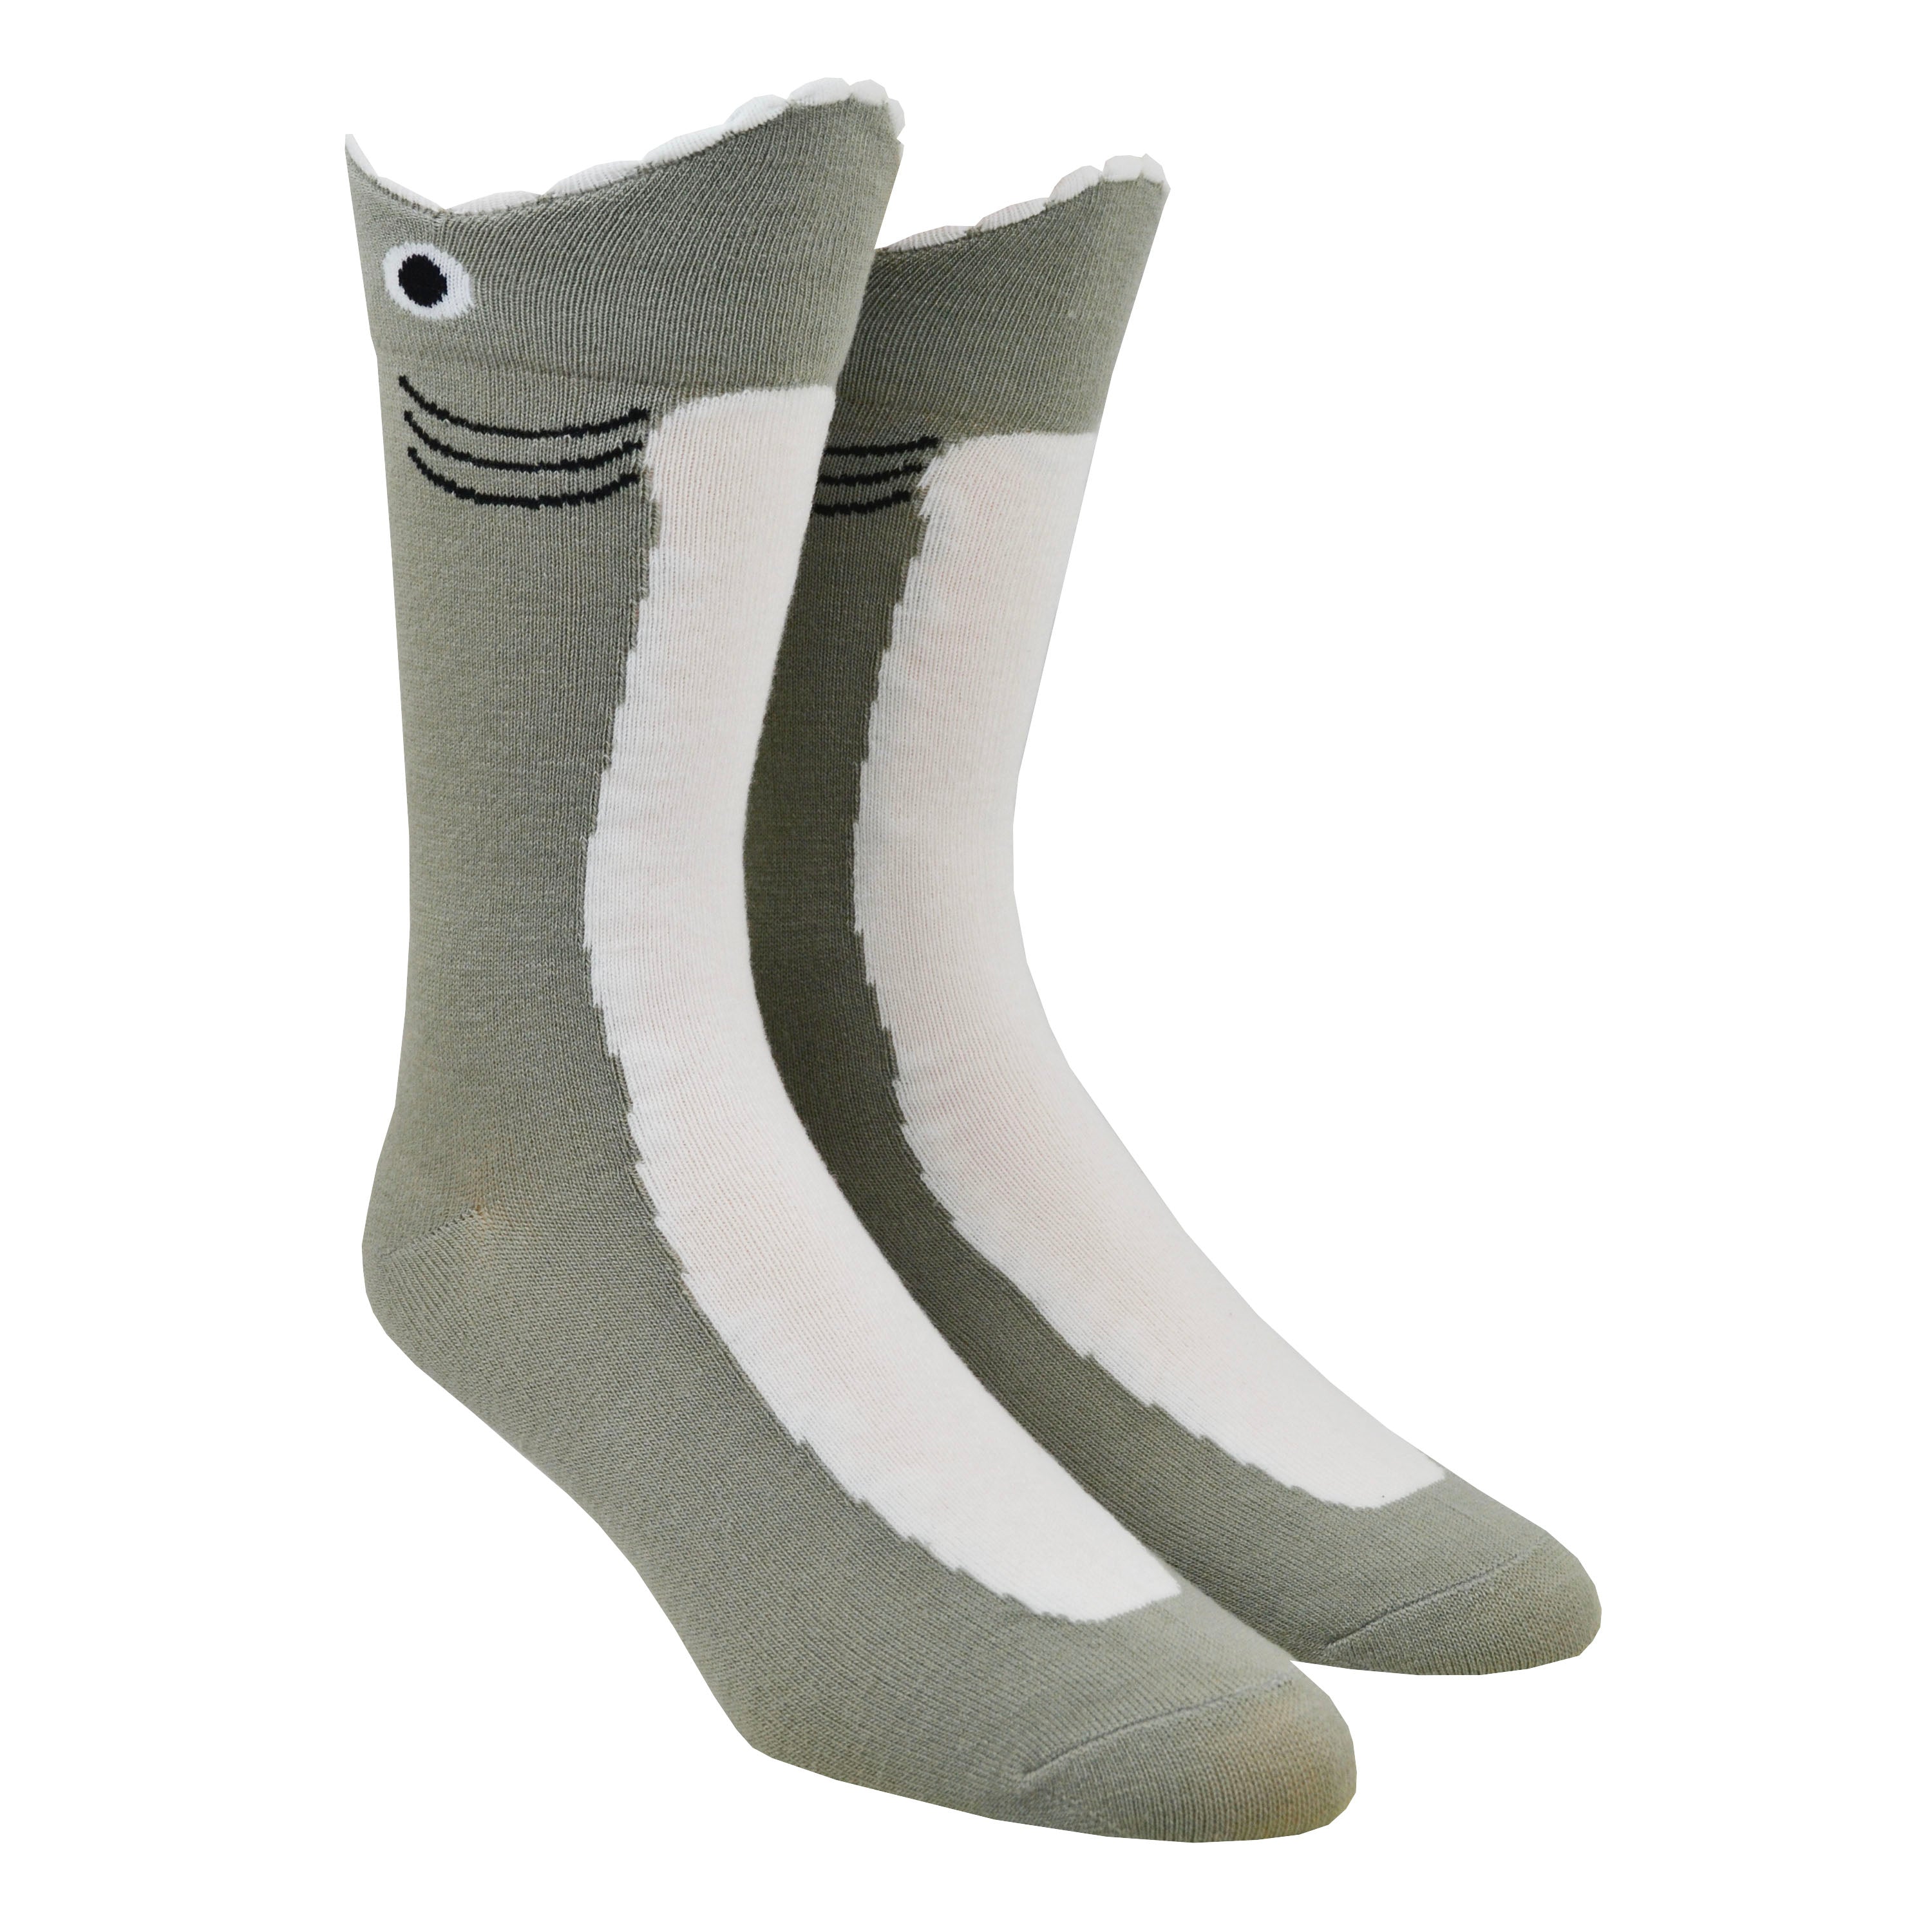 Shown on leg forms, a pair of K.Bell brand men's acrylic crew socks in grey and white. These socks feature a white front and are shaped like a shark. The cuff is the sharks mouth with a frilled edge to mimic the sharks teeth around your leg.